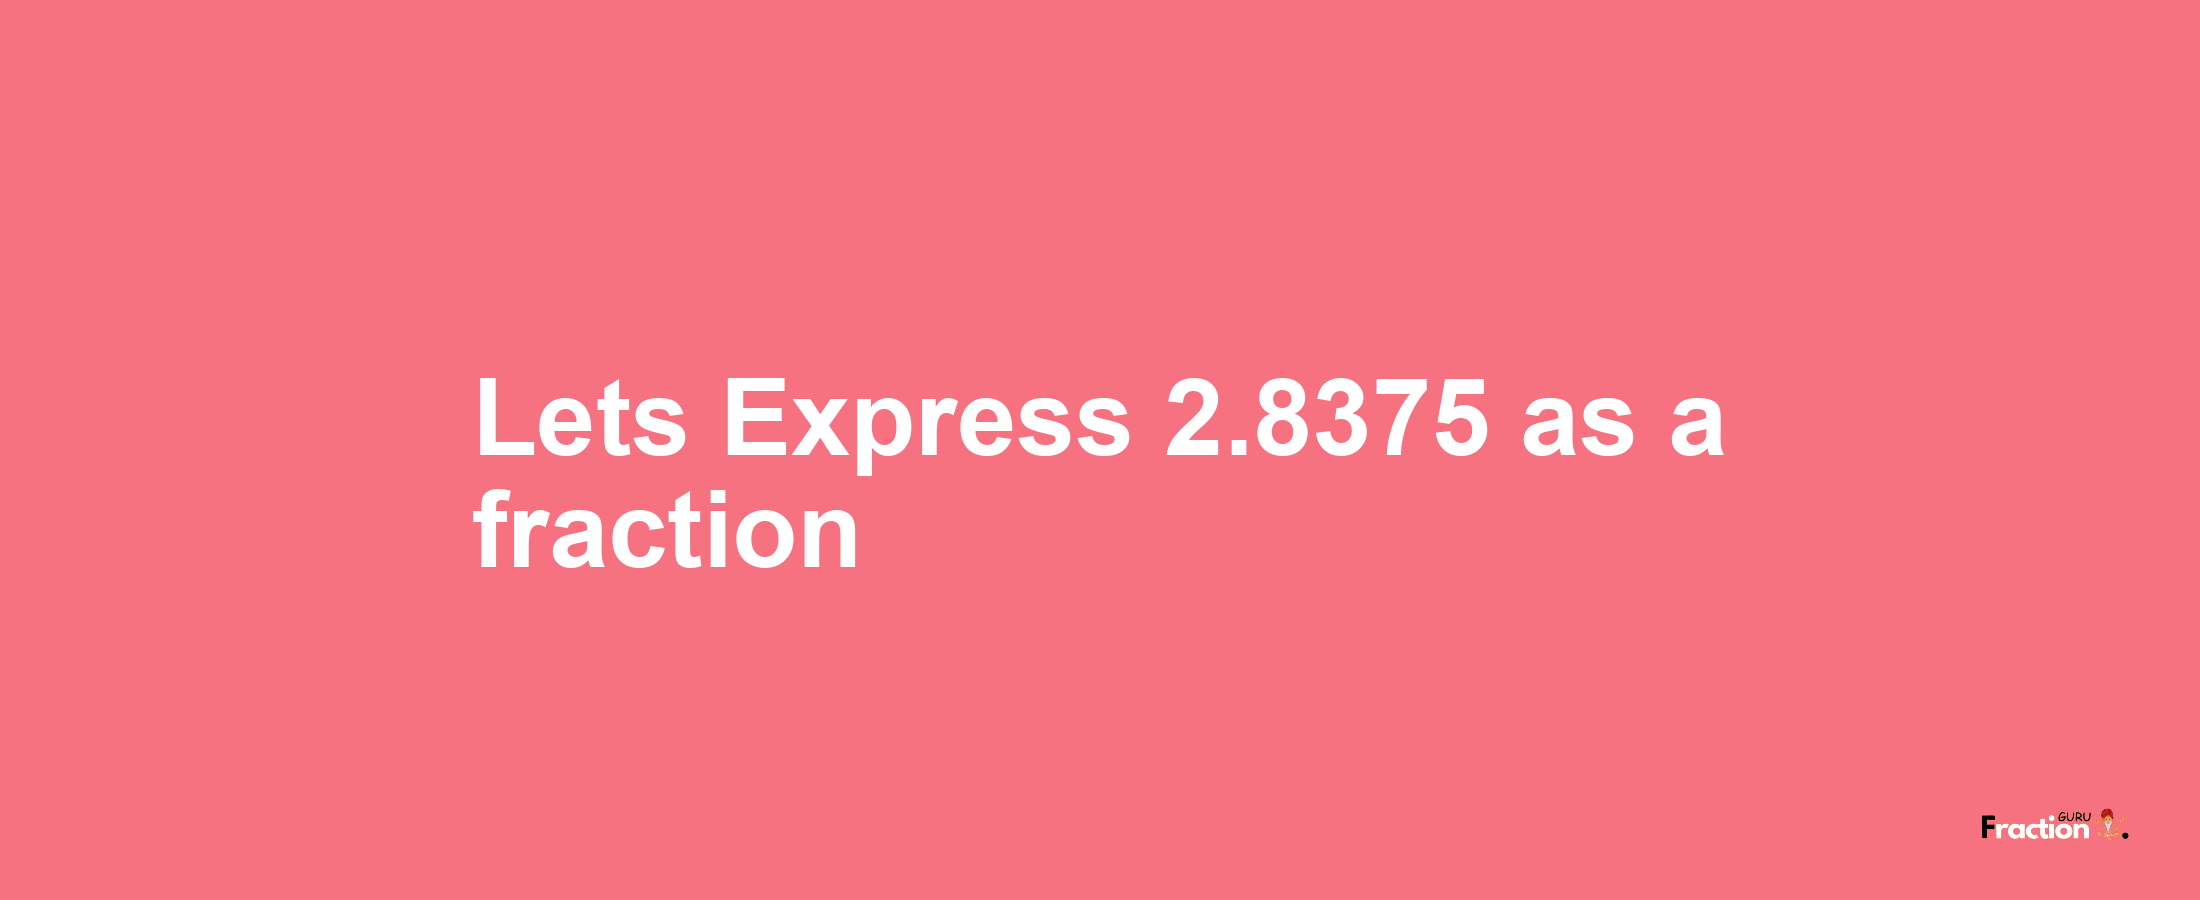 Lets Express 2.8375 as afraction